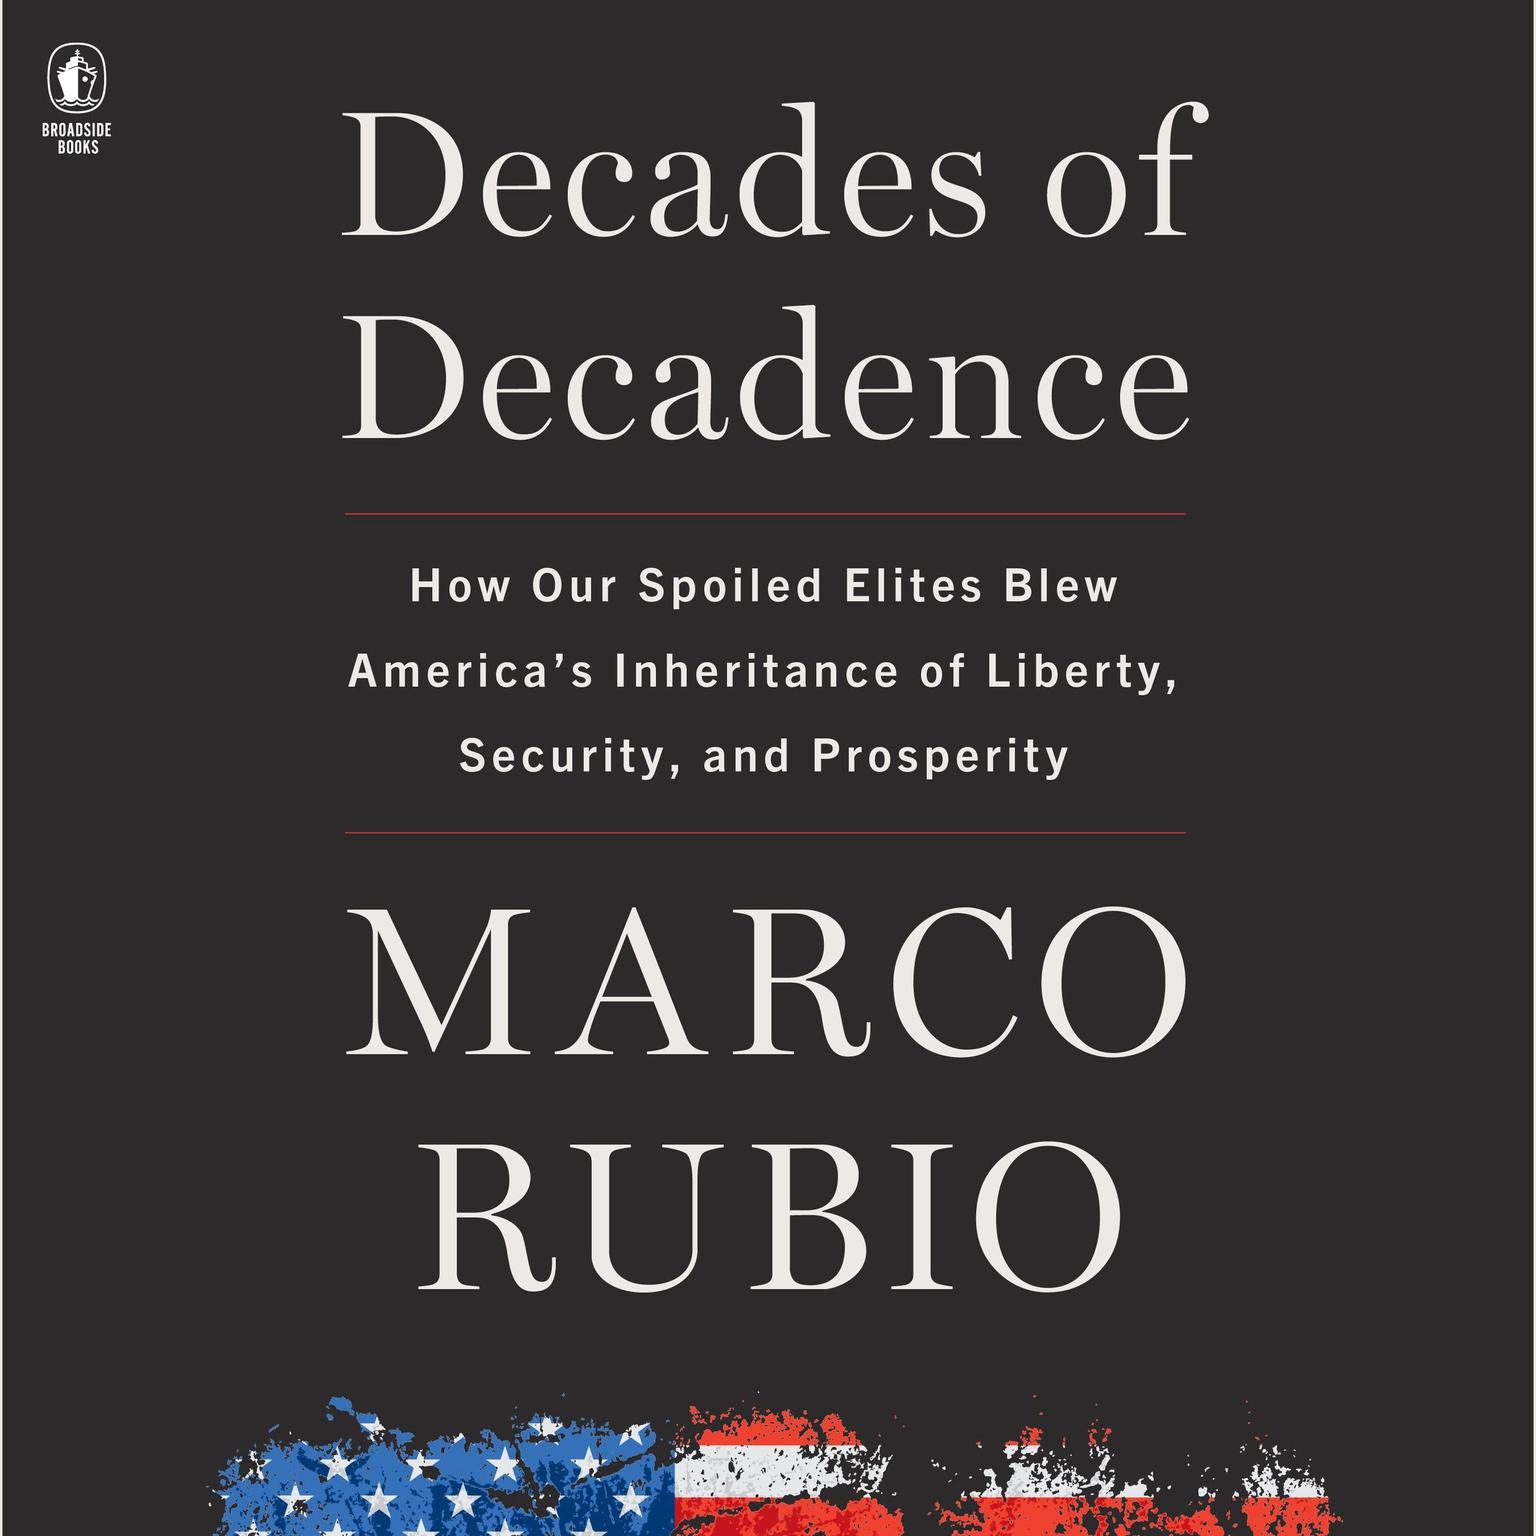 Decades of Decadence: How Our Spoiled Elites Blew Americas Inheritance of Liberty, Security, and Prosperity Audiobook, by Marco Rubio